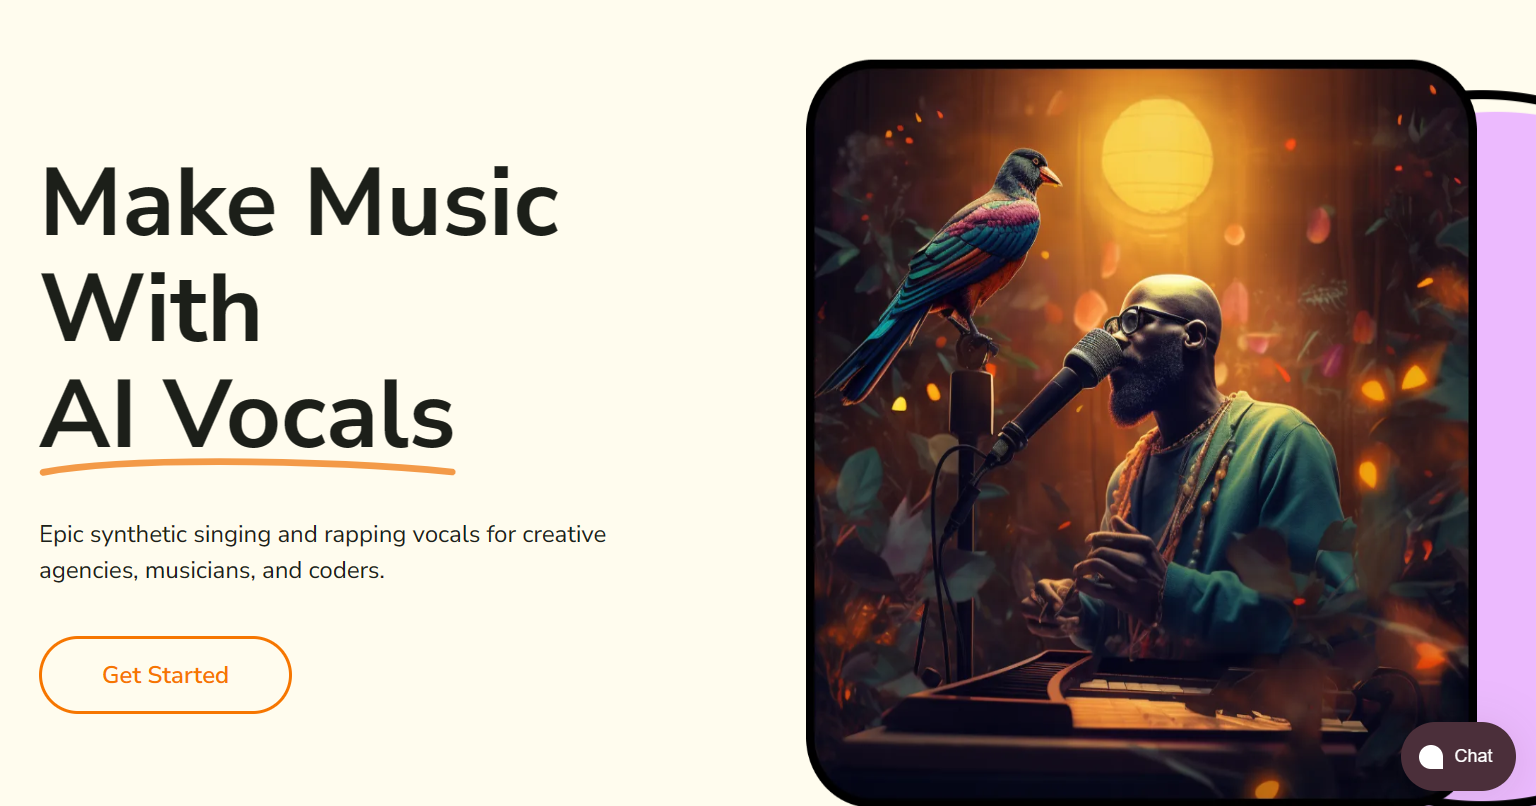 uberduck.ai – make music with AI vocals